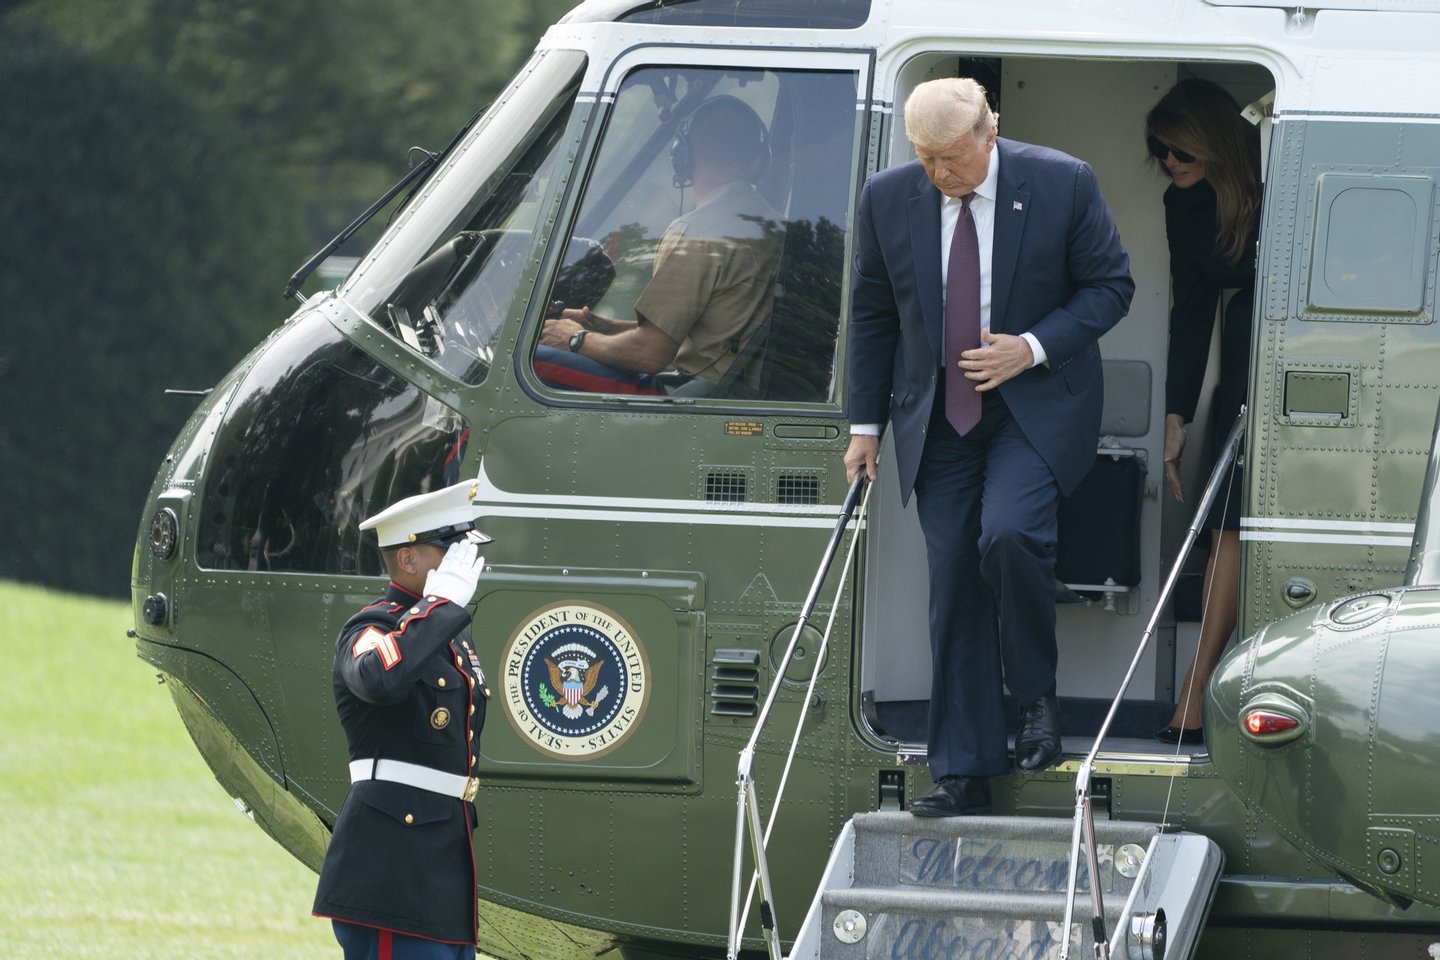 epa08662177 US President Donald J. Trump (C) and First lady Melania Trump (Back-R) exit Marine One as they return to the White House, in Washington, DC, USA, on 11 September 2020, after attending a Flight 93 National Memorial 19th Anniversary of the 9/11 terrorist attack Observance in Shanksville, Pennsylvania. EPA/Chris Kleponis / POOL